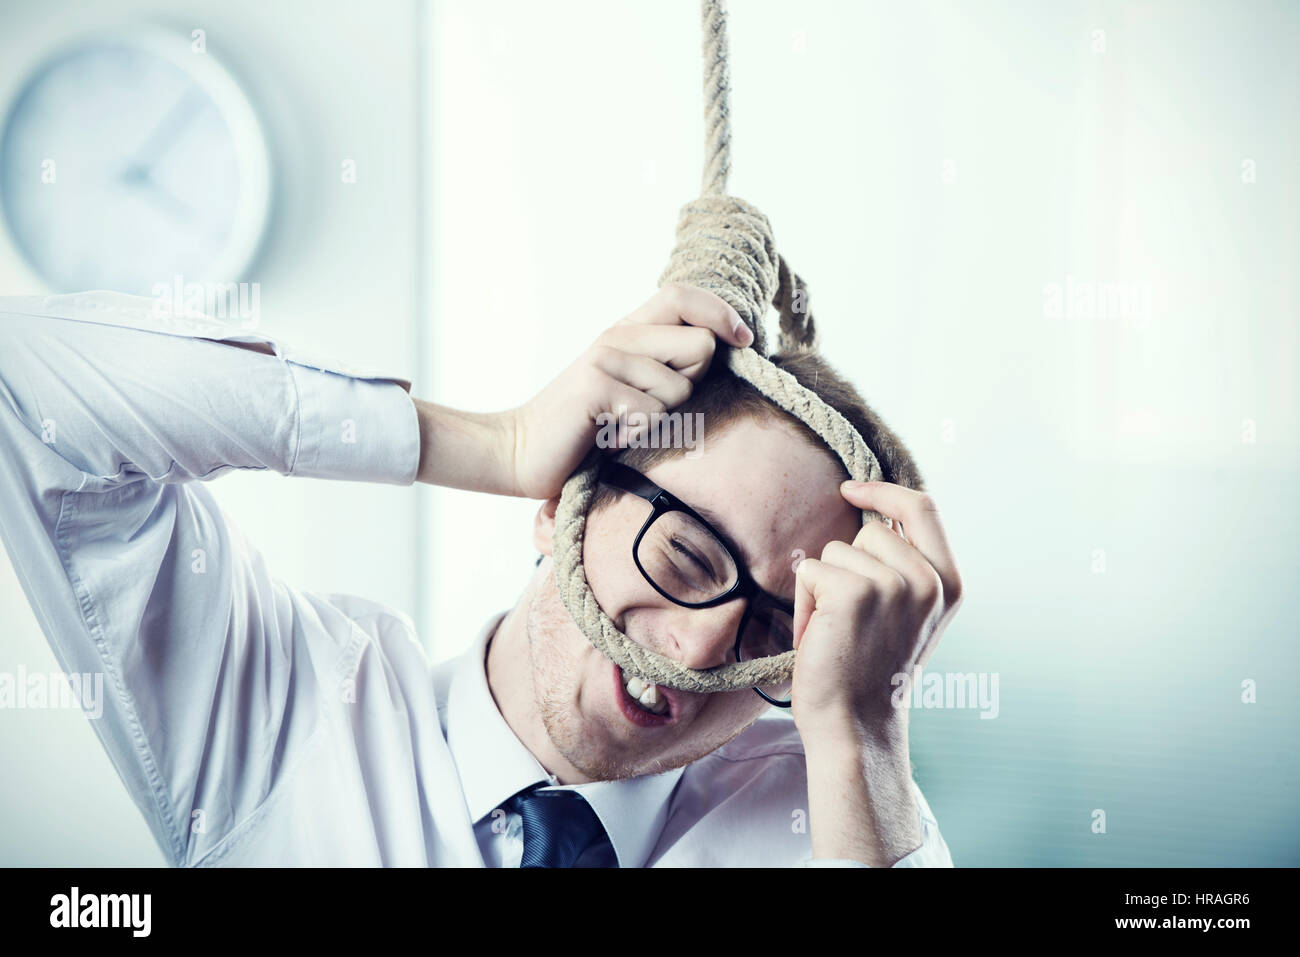 A office worker is setting up a noose Stock Photo